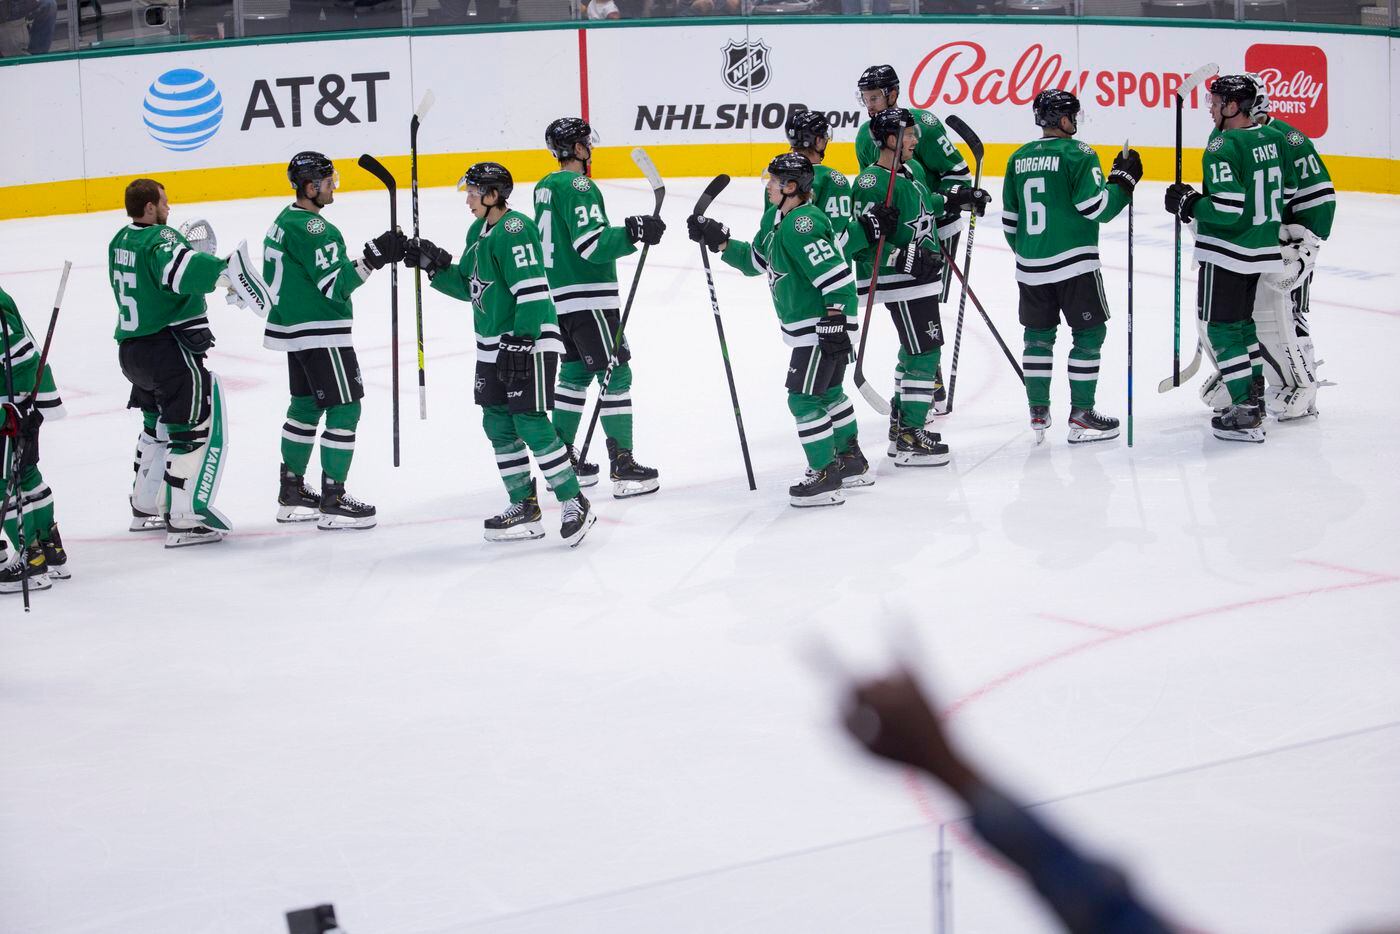 Dallas Stars players celebrate their preseason game win against St. Louis Blues on Tuesday, Oct. 5, 2021, at American Airlines Center in Dallas. (Juan Figueroa/The Dallas Morning News)